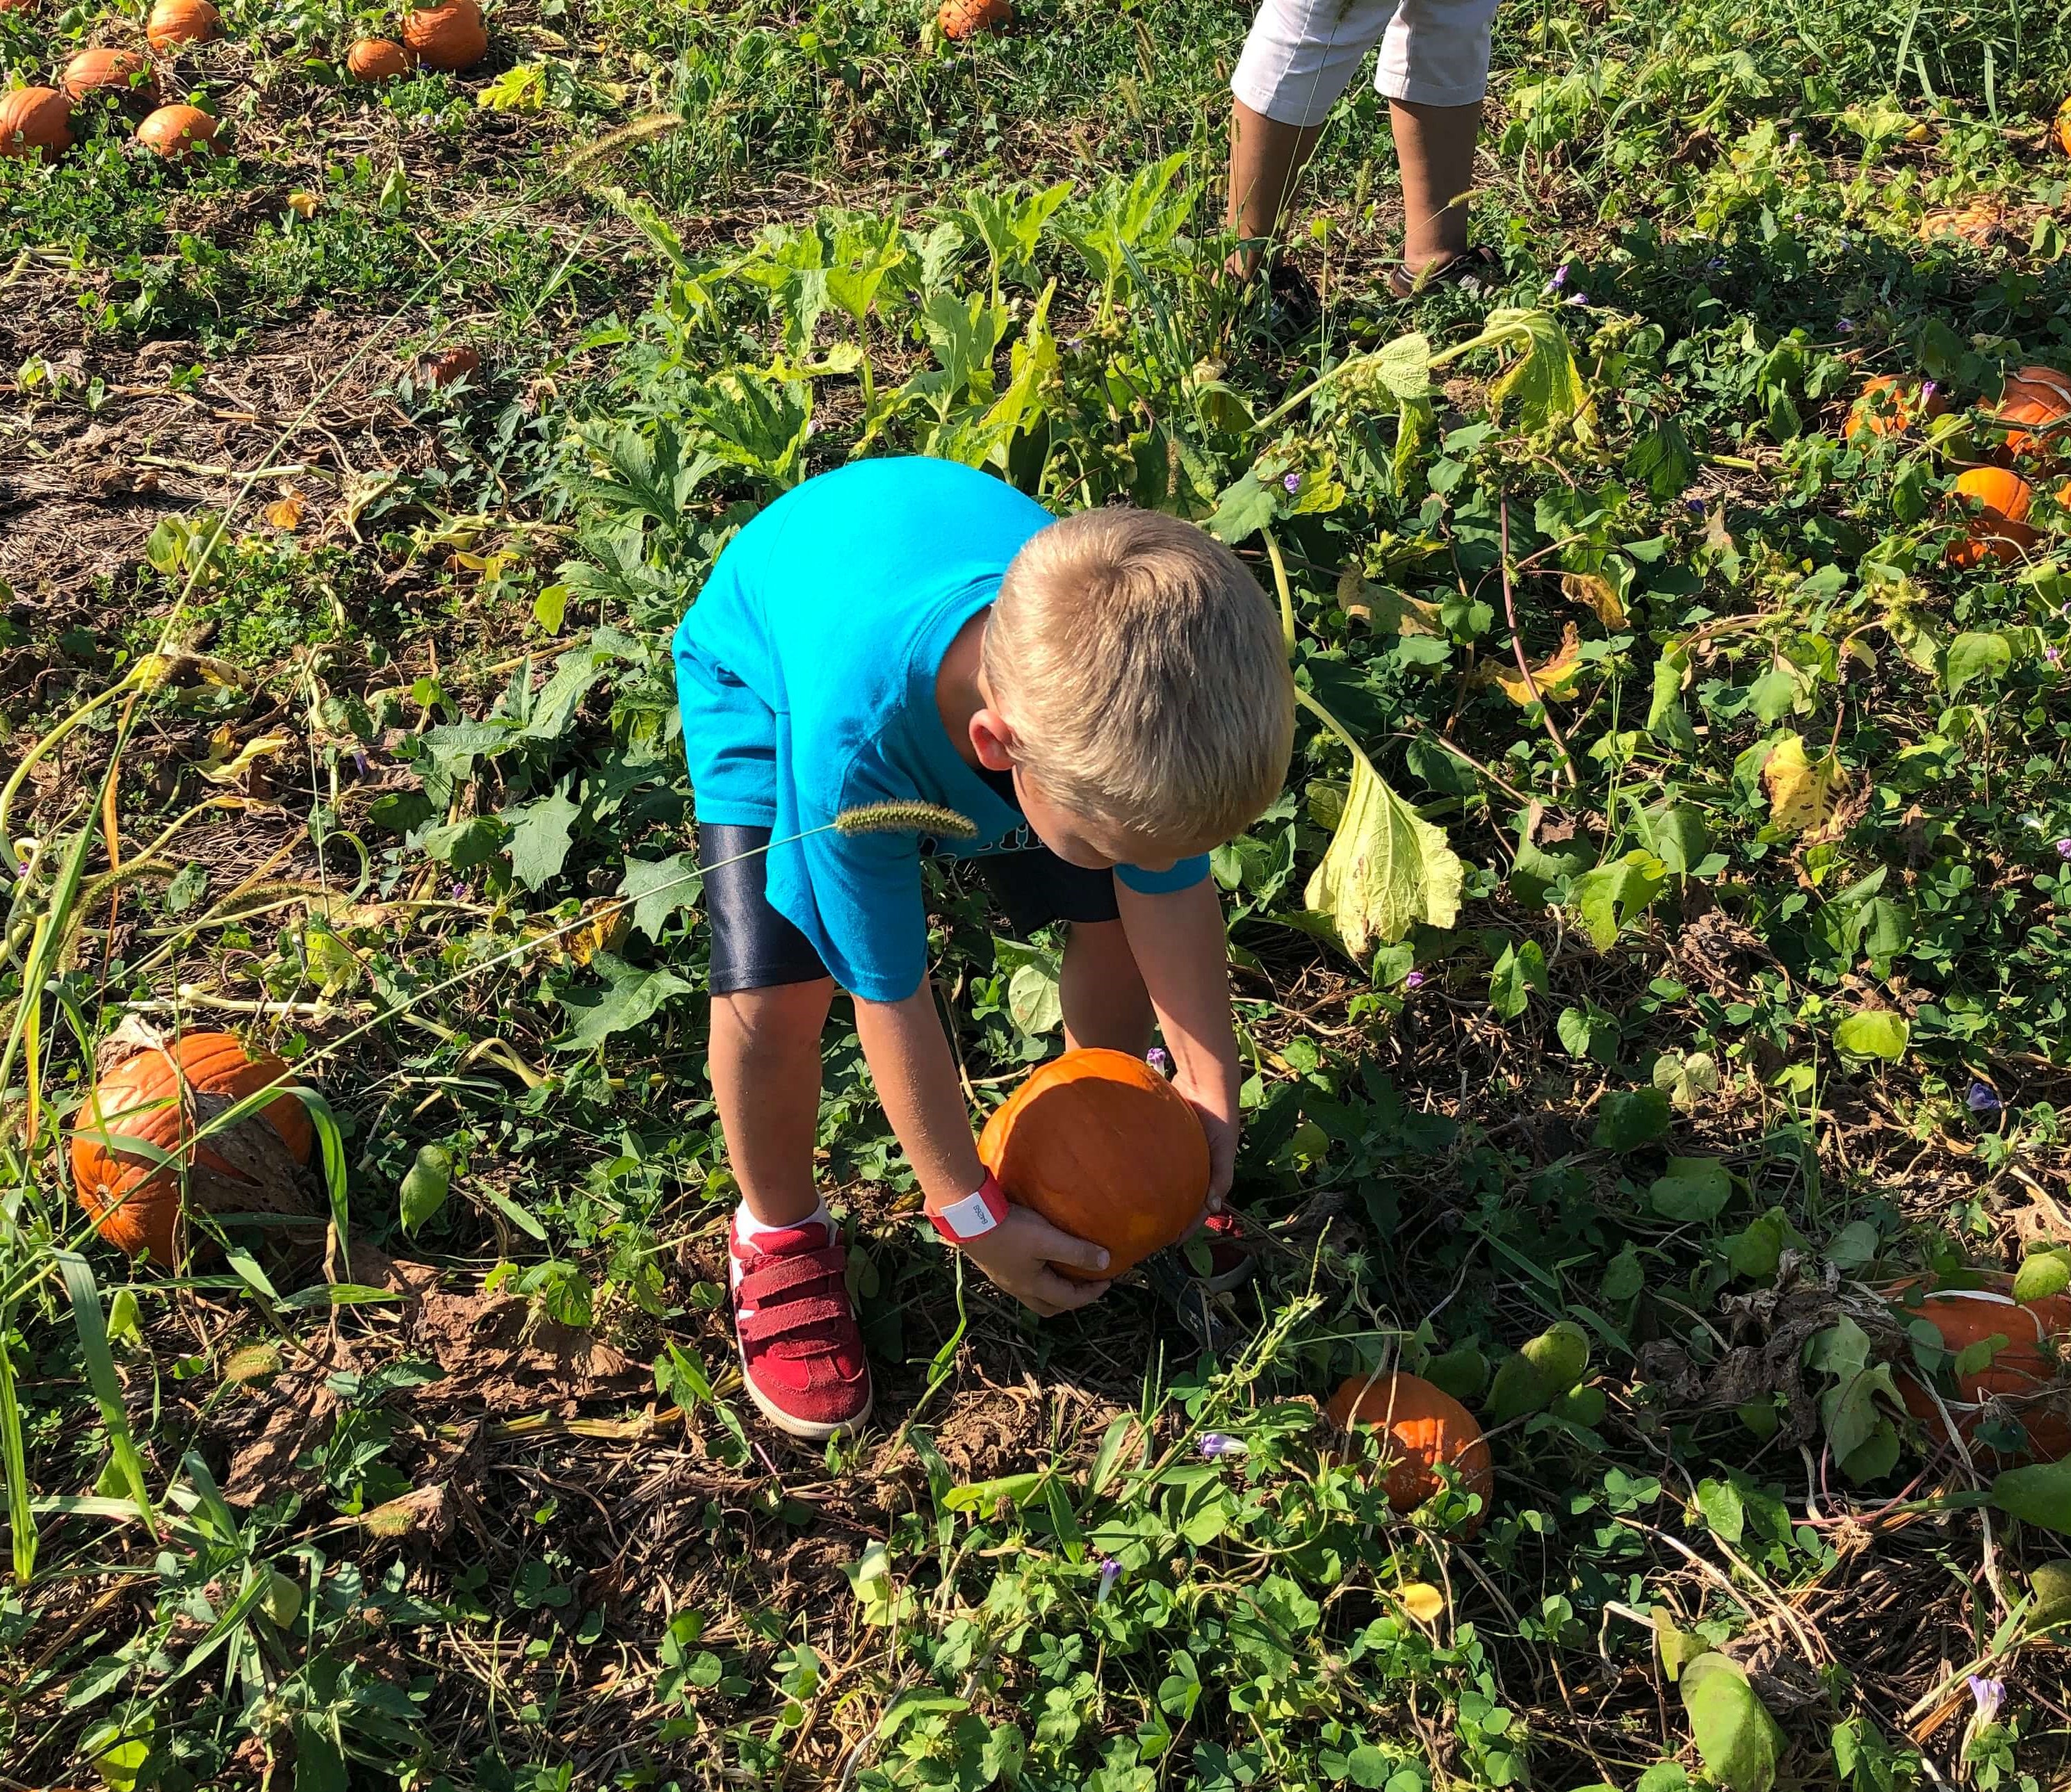 a young boy picks a pumpkin from the vine at a patch